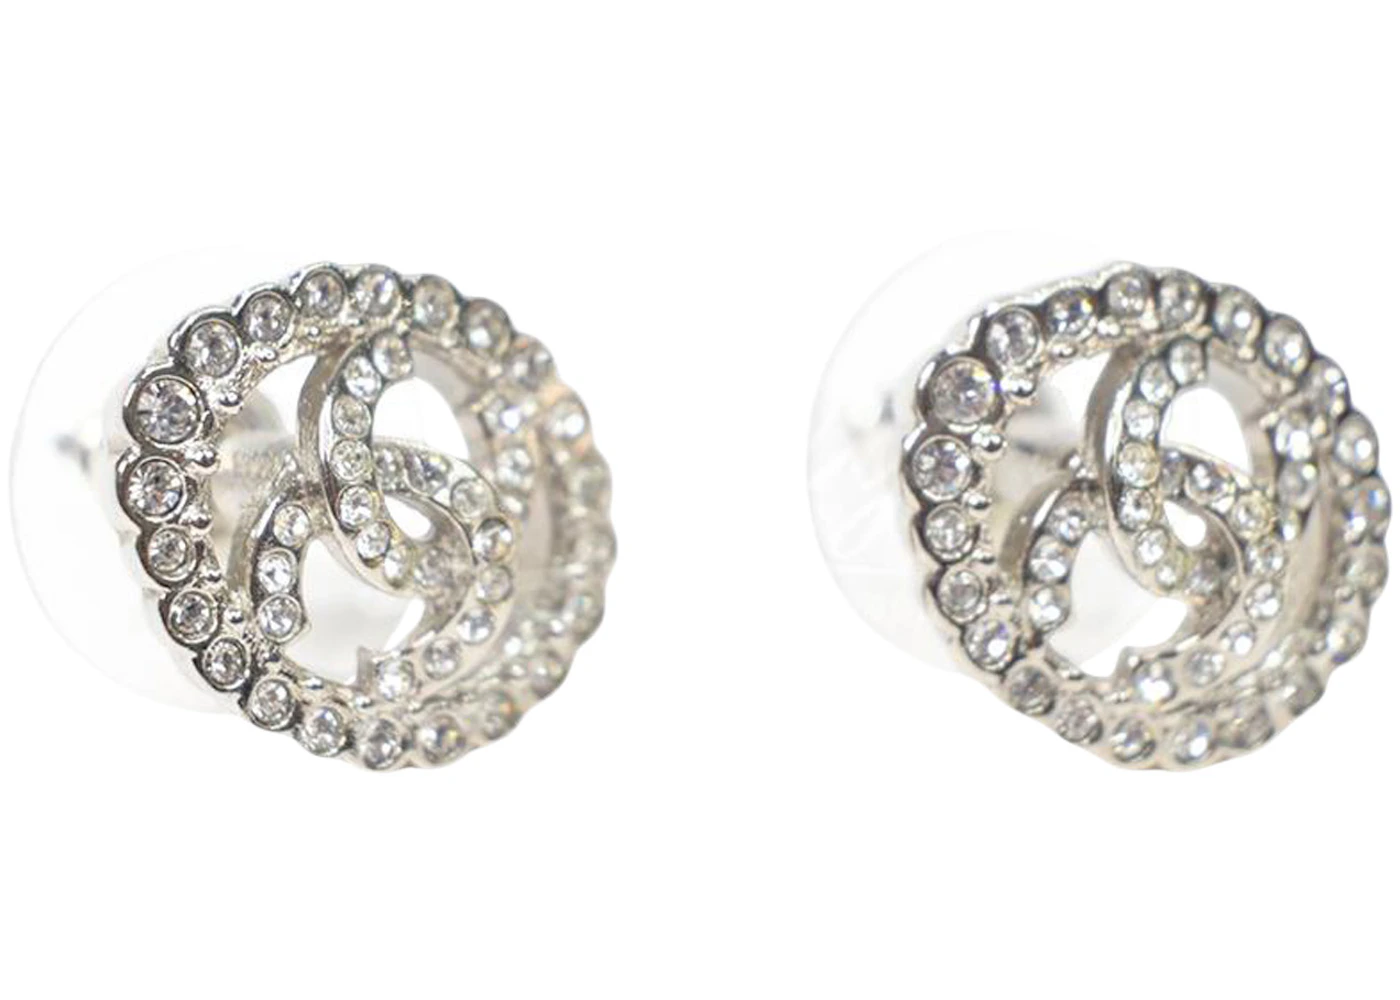 Chanel 1988 Crystal ＆ Gold Cc Earrings Clip-On 23 17237 - 2 Pieces